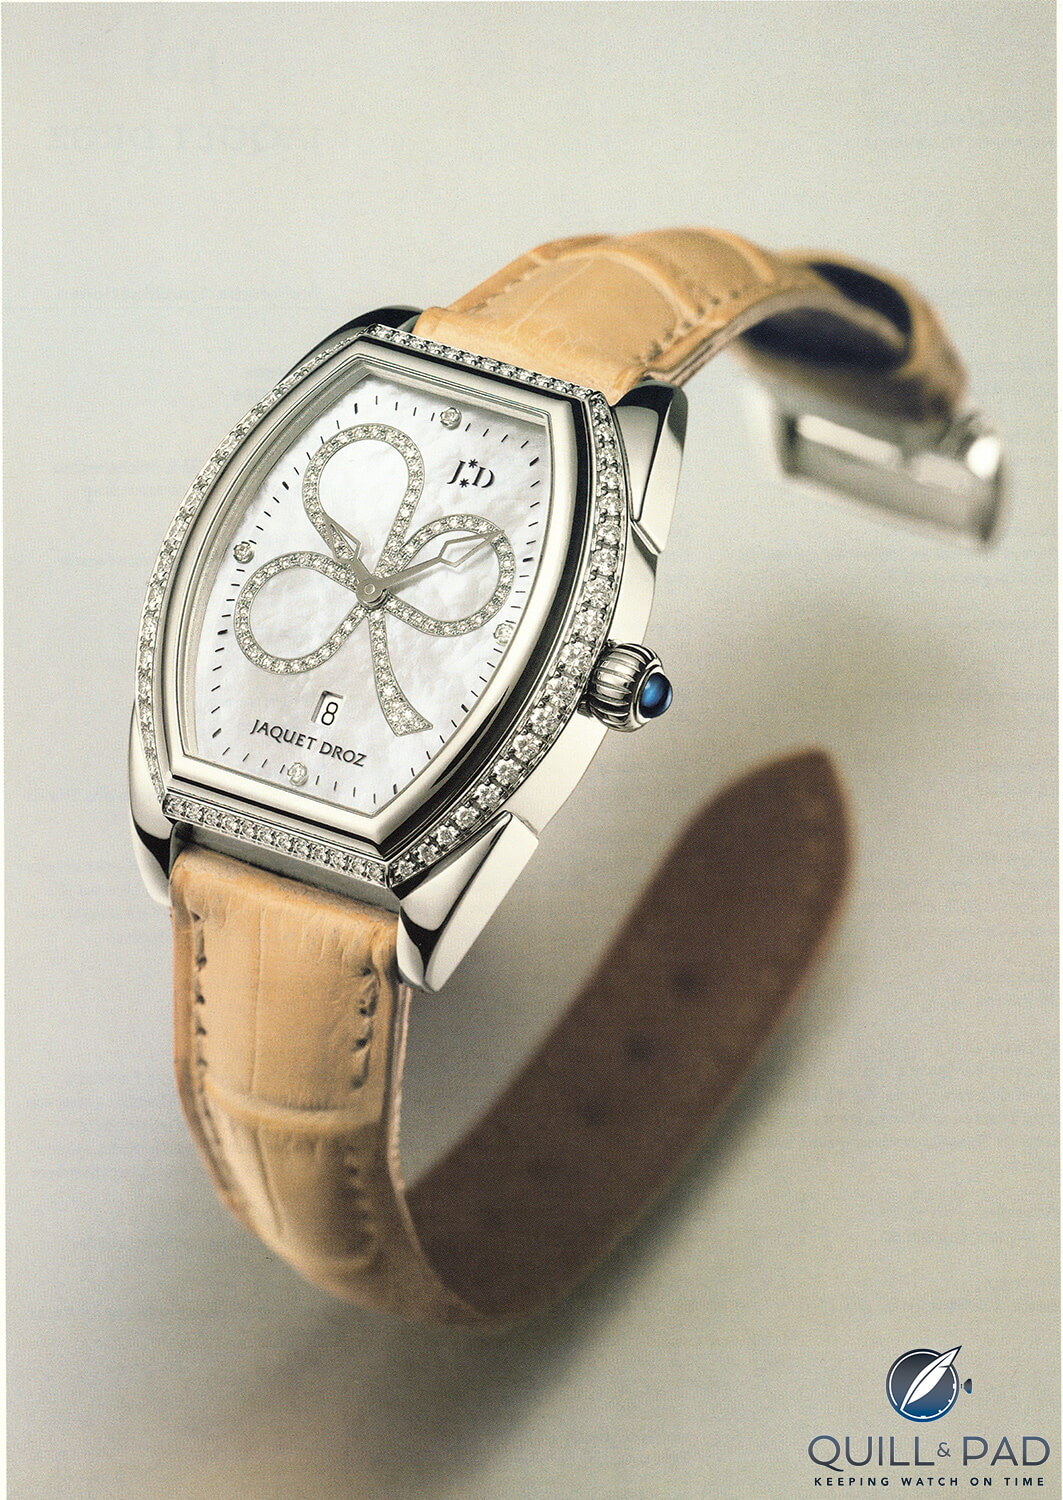 This Jaquet Droz Tonneau Lady from 2002 displays the clover leaf on its mother-of-pearl dial as part of the watch design